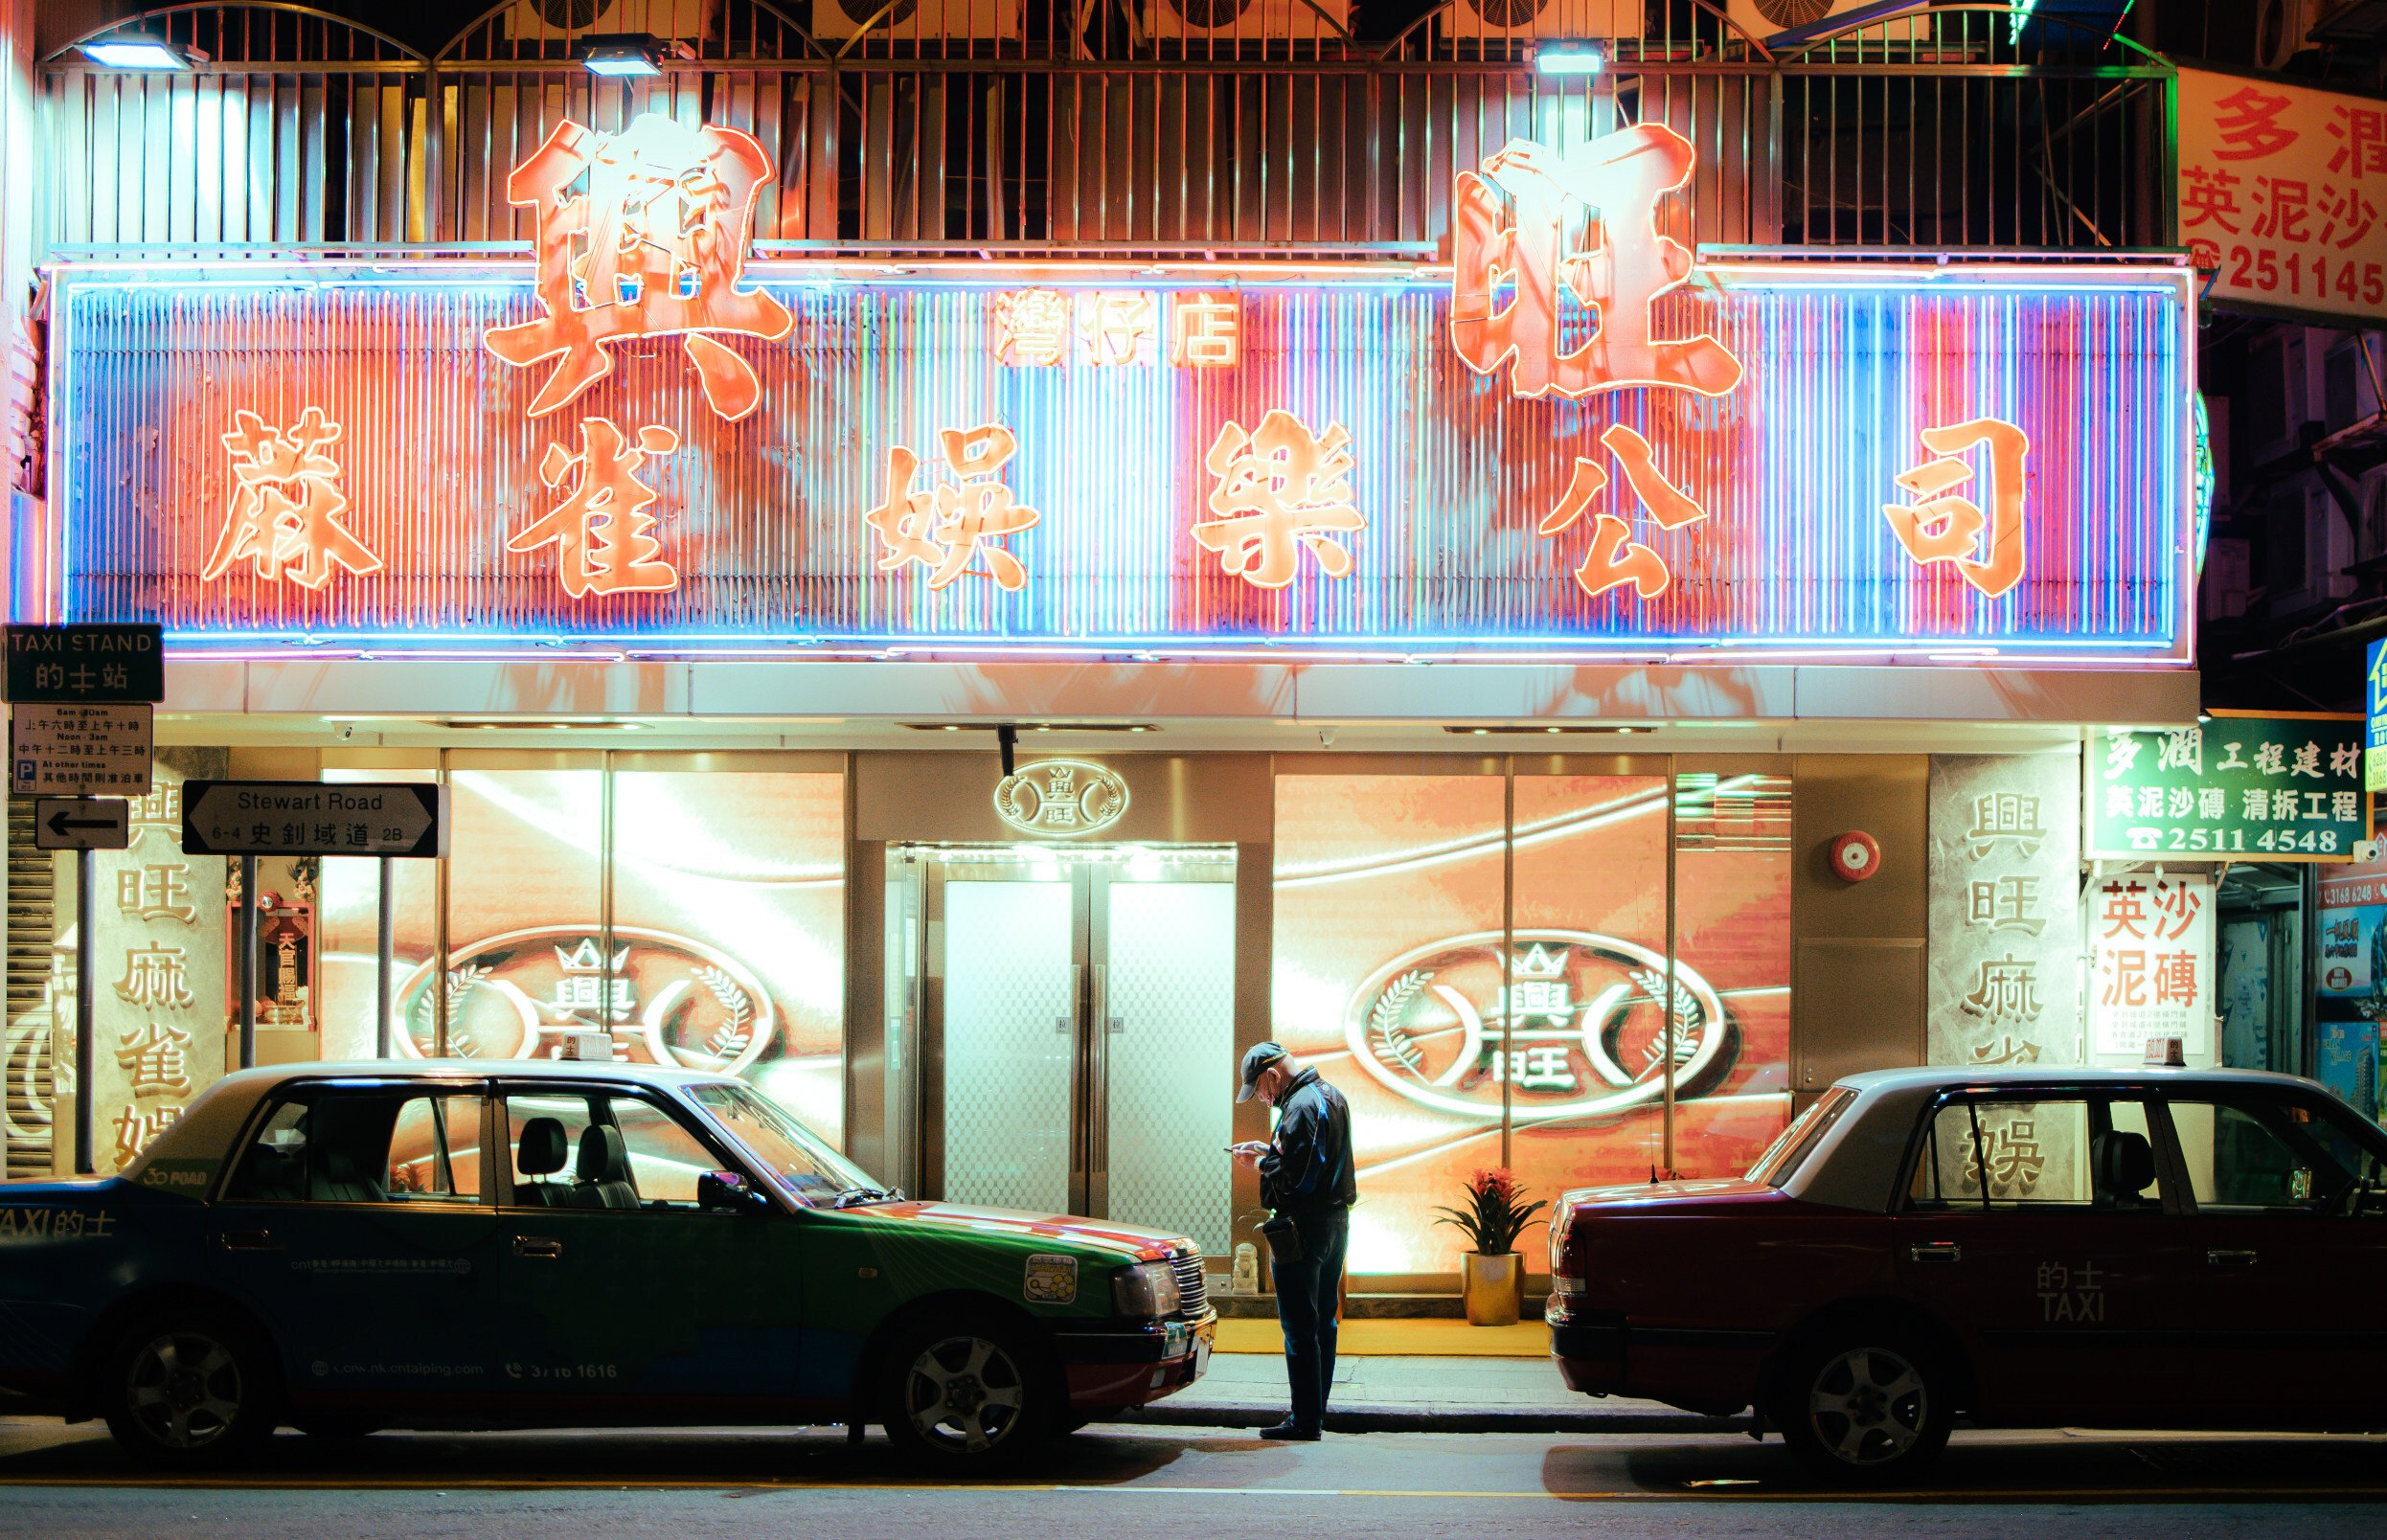 End Of Work, one of the images of neon-lit Hong Kong streets featured in Justin Wong’s exhibition Nostalgic Time in Sha Tin. Photo: Justin Wong